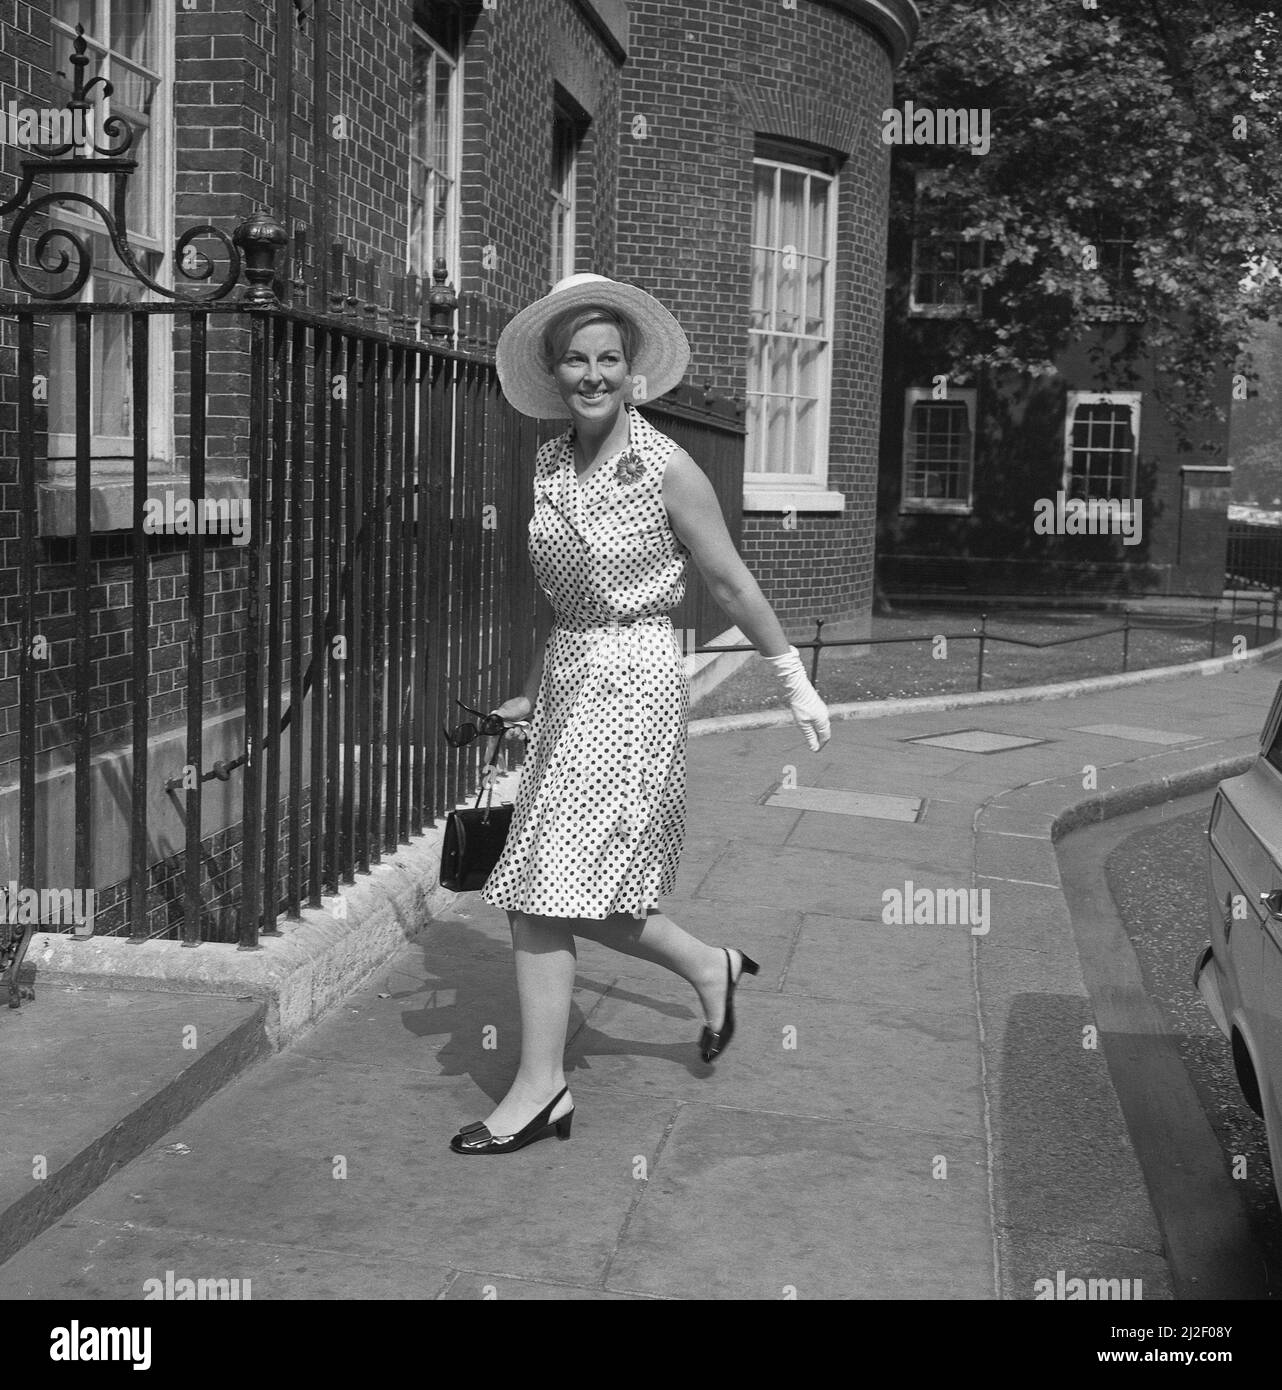 Mrs Barbara Stonehouse, wife of John Stonehouse, Labour-Co-operative MP for Wednesbury, Staffordshire, arrives at 10 Downing Street, London, for the party given by Mrs Harold Wilson for the wives of members of both Houses of Parliament.  The party was the first of two such events, which have now become customary before Parliament rises for the summer recess. Stock Photo